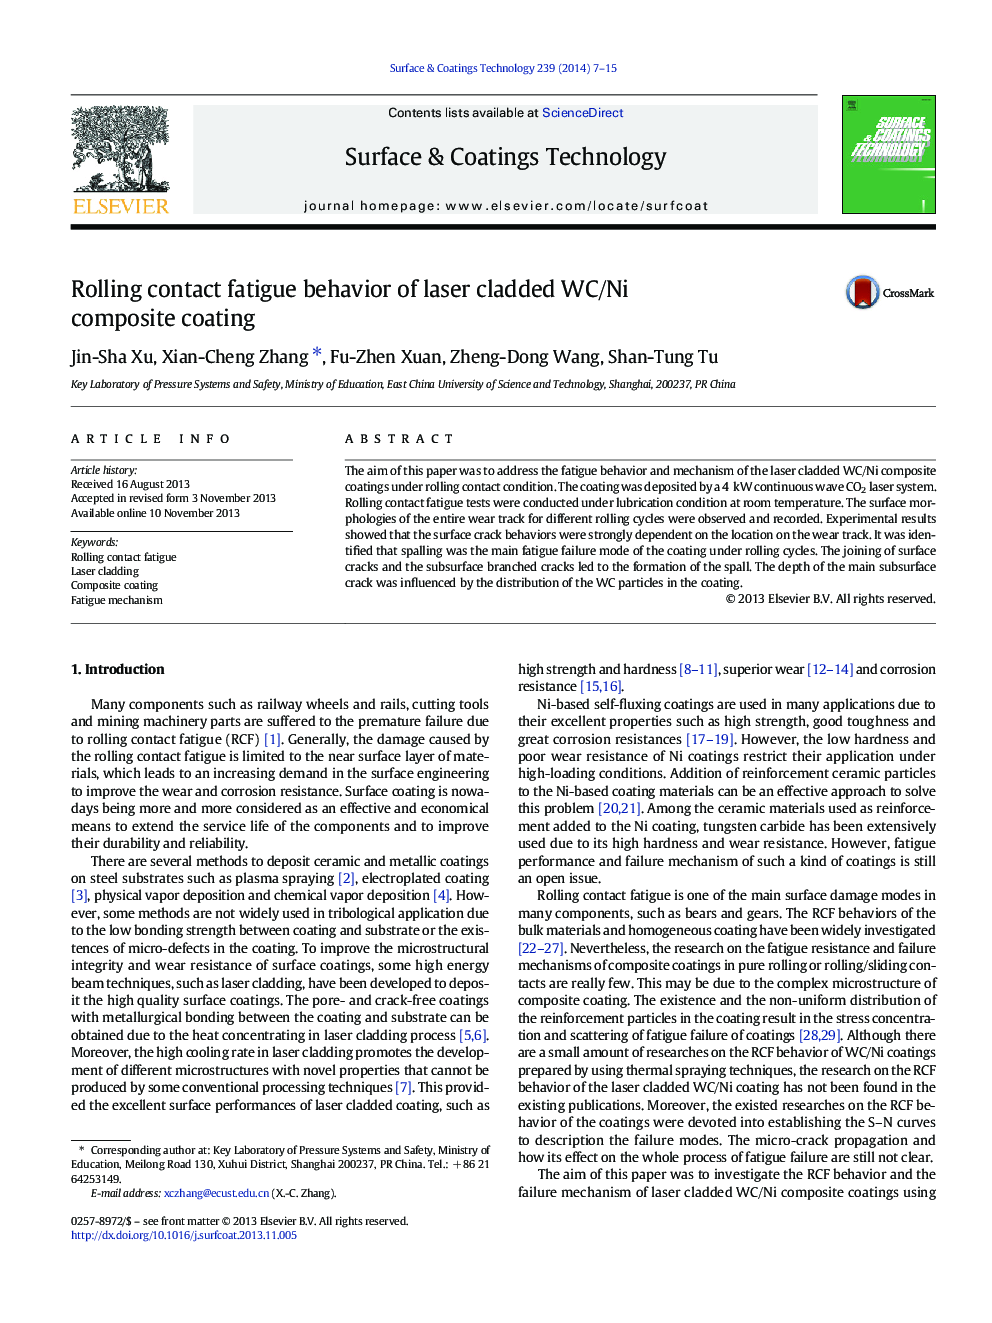 Rolling contact fatigue behavior of laser cladded WC/Ni composite coating